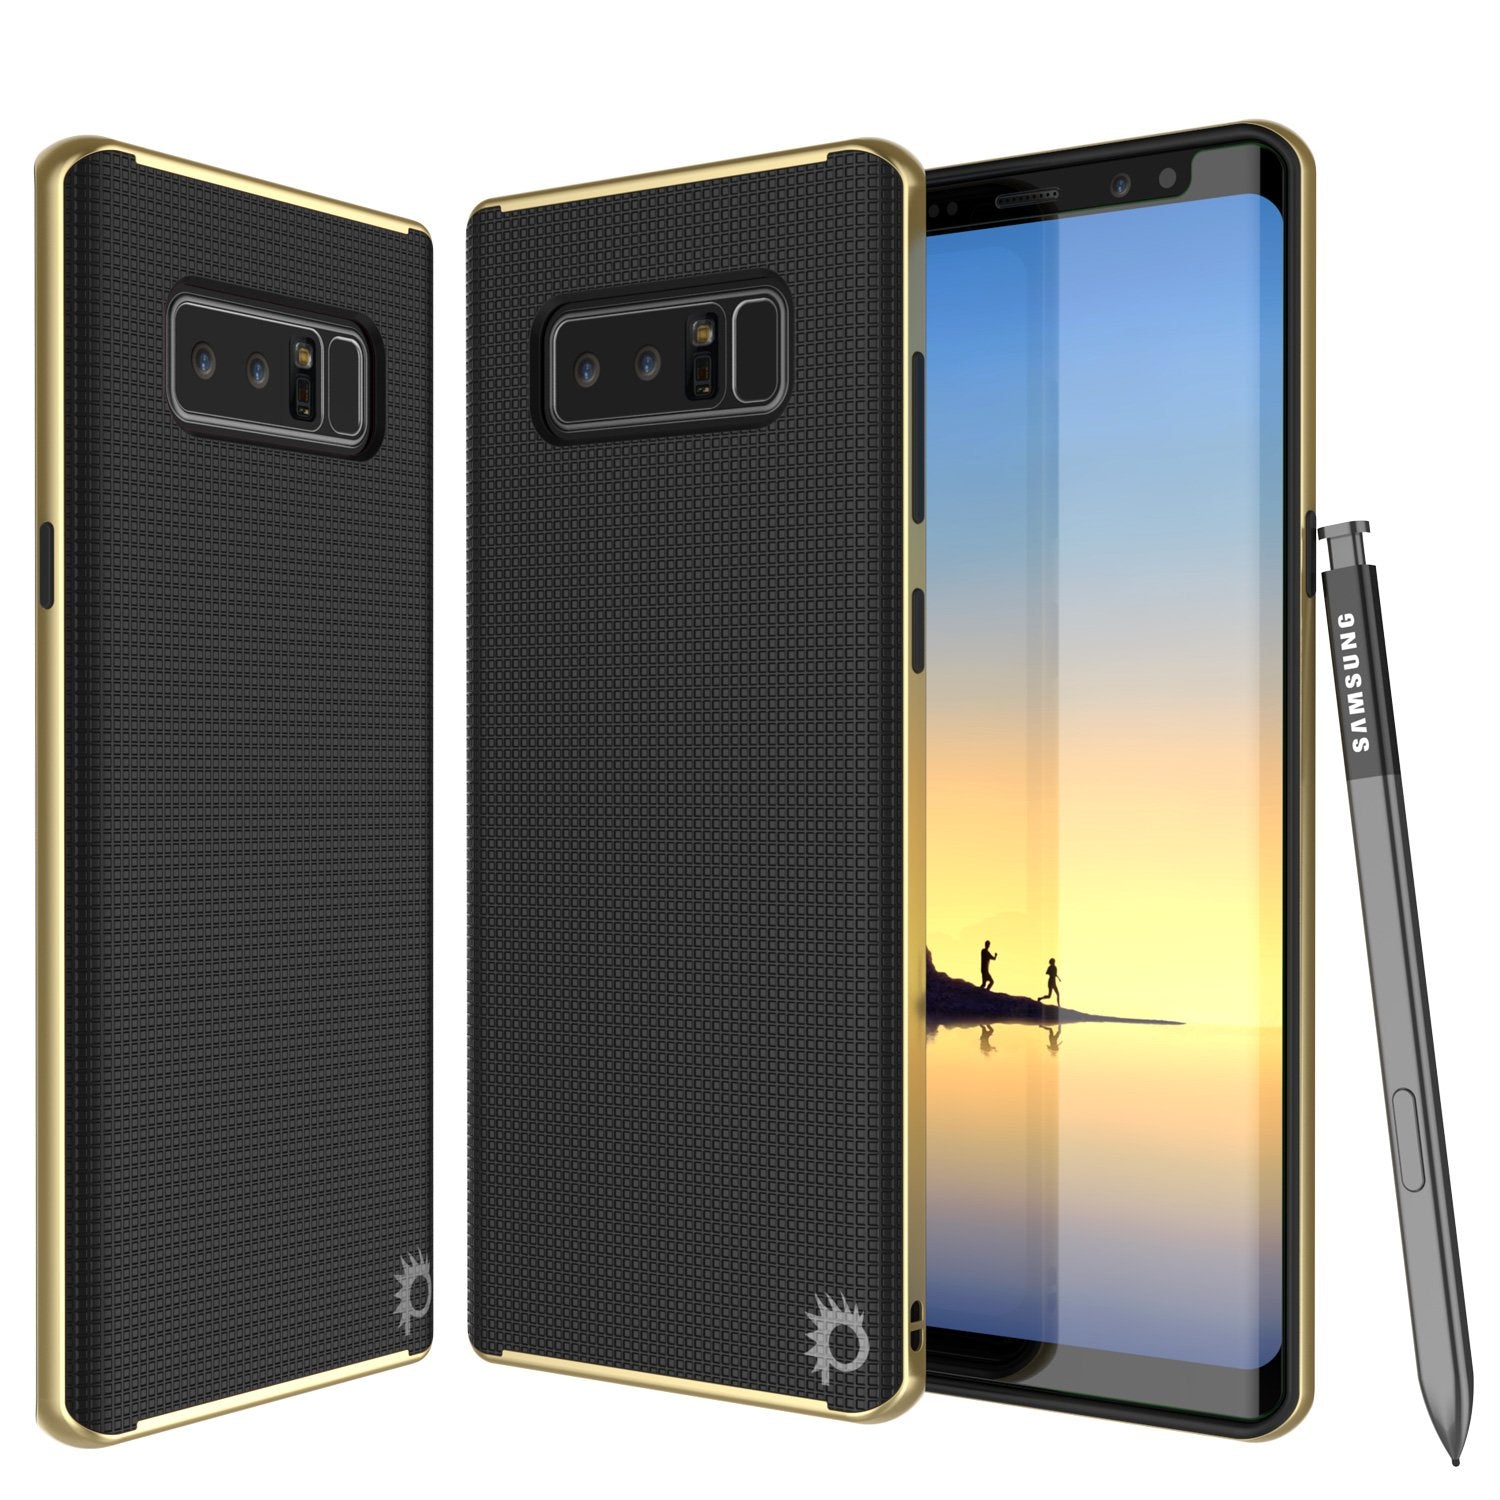 Galaxy Note 8 Case, PunkCase Stealth Gold Series Hybrid 3-Piece Shockproof Dual Layer Cover